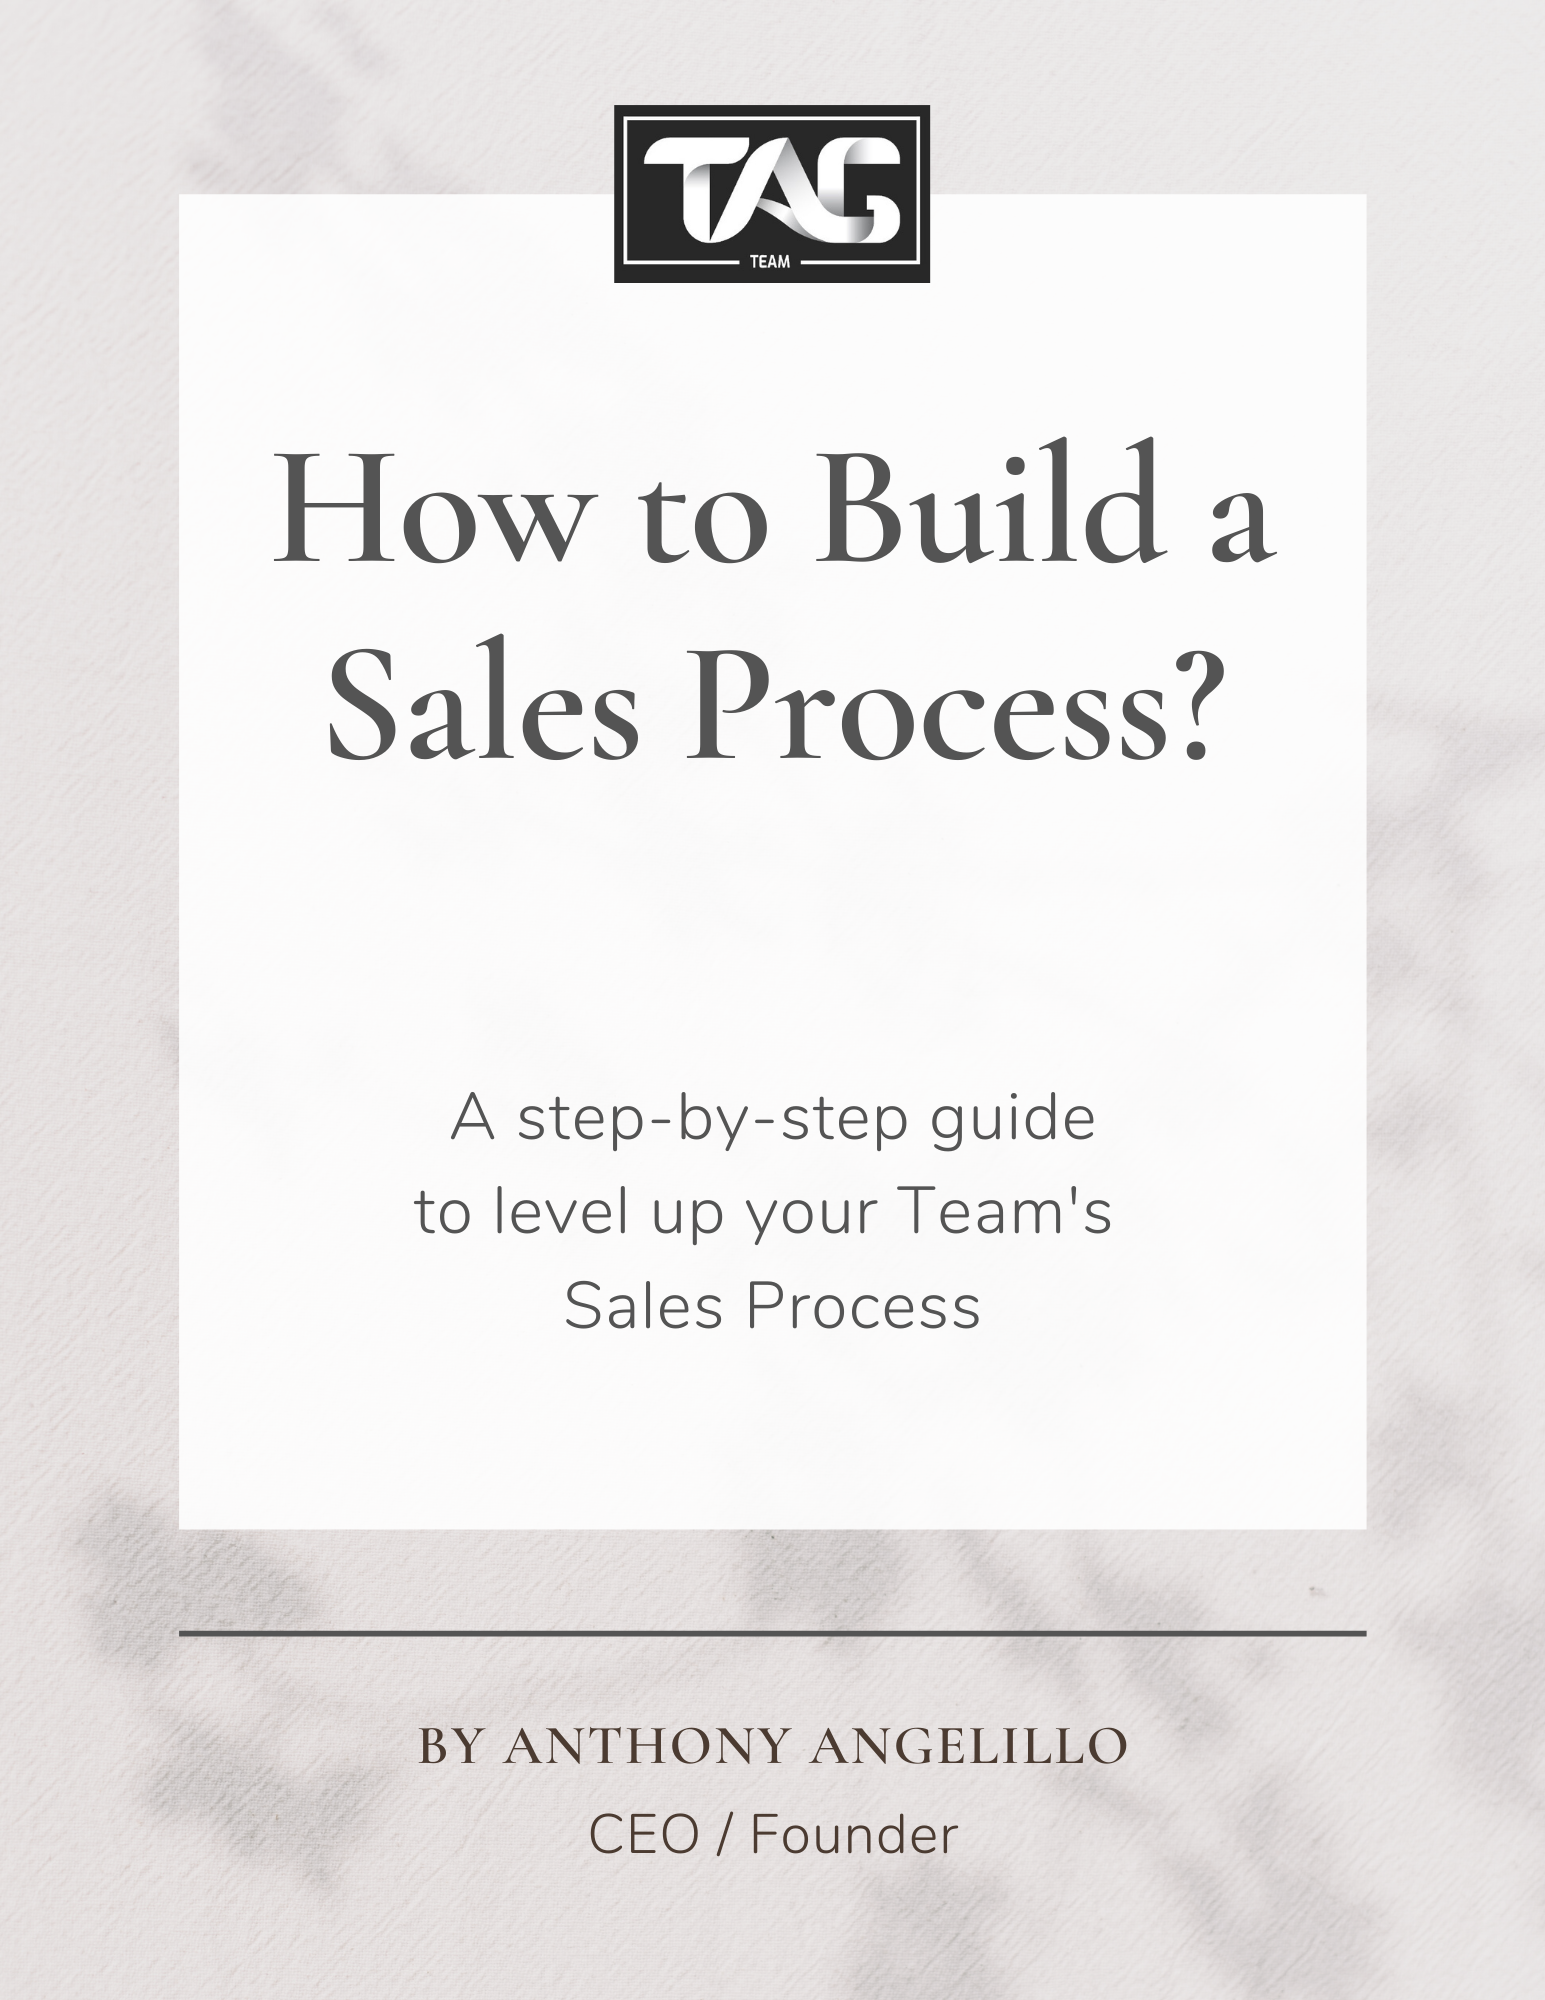 How to Build a Sales Process